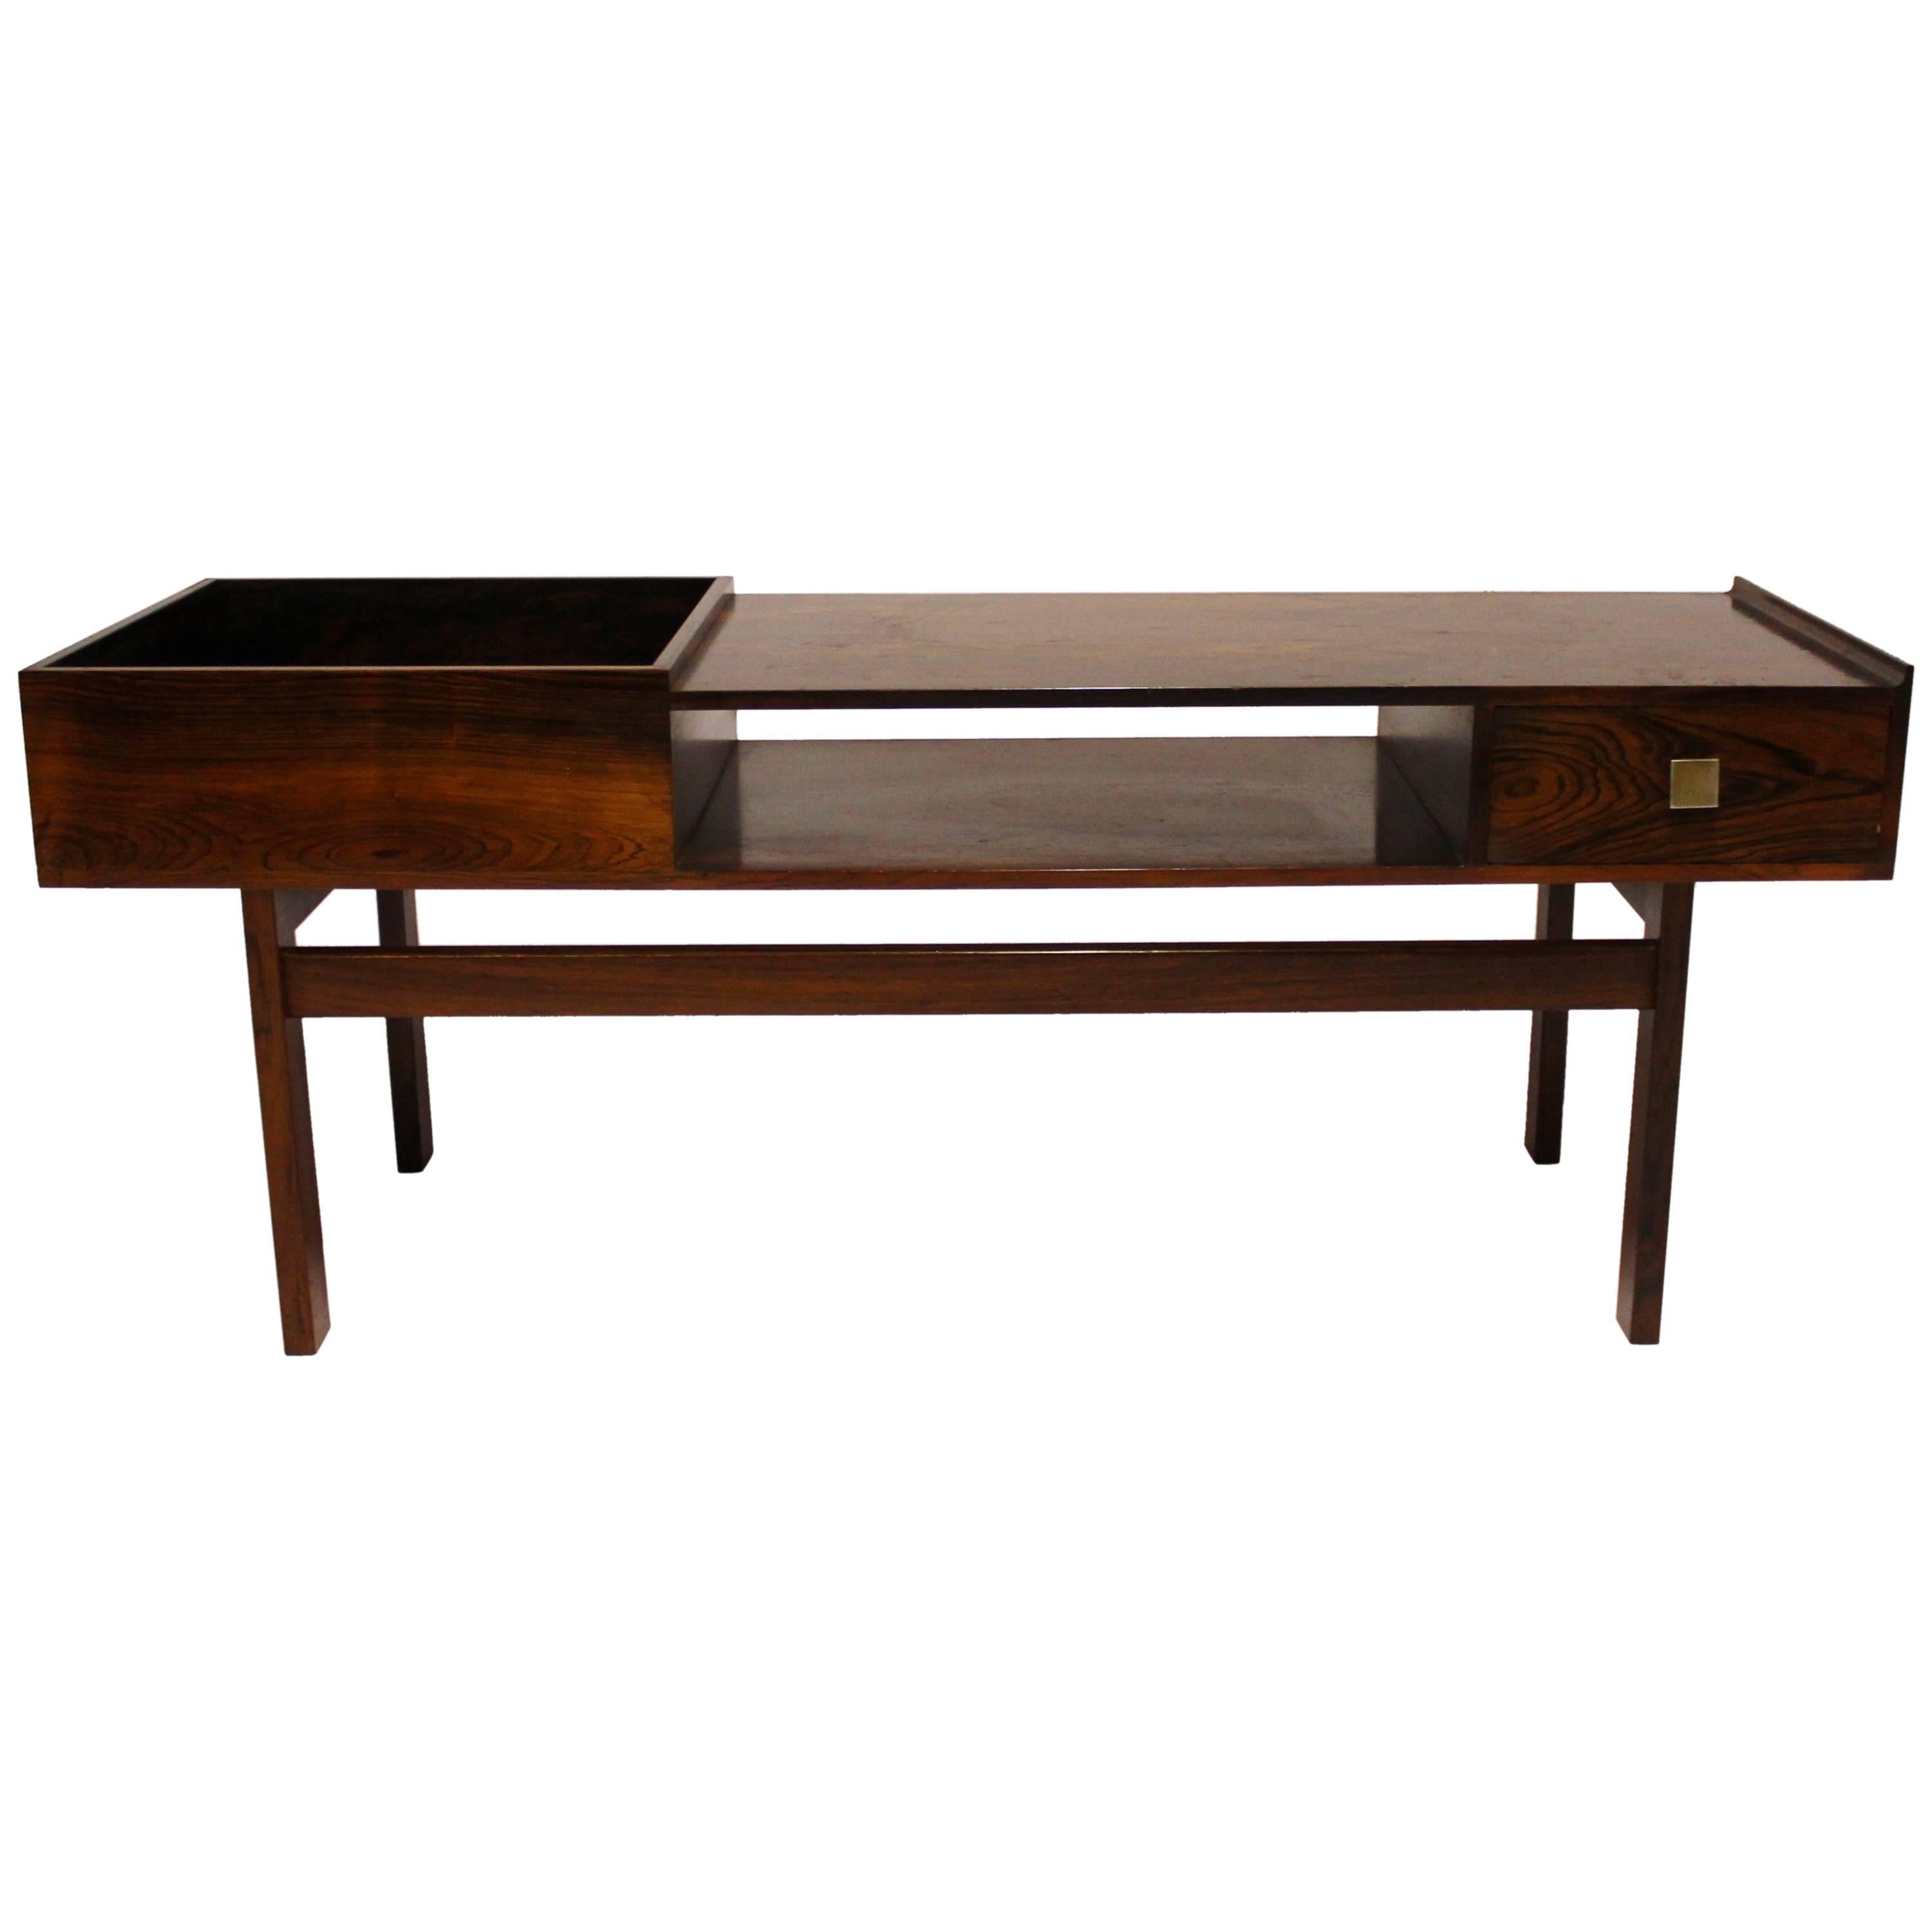 Low Sideboard in Rosewood with Drawer, of Danish Design, 1960s